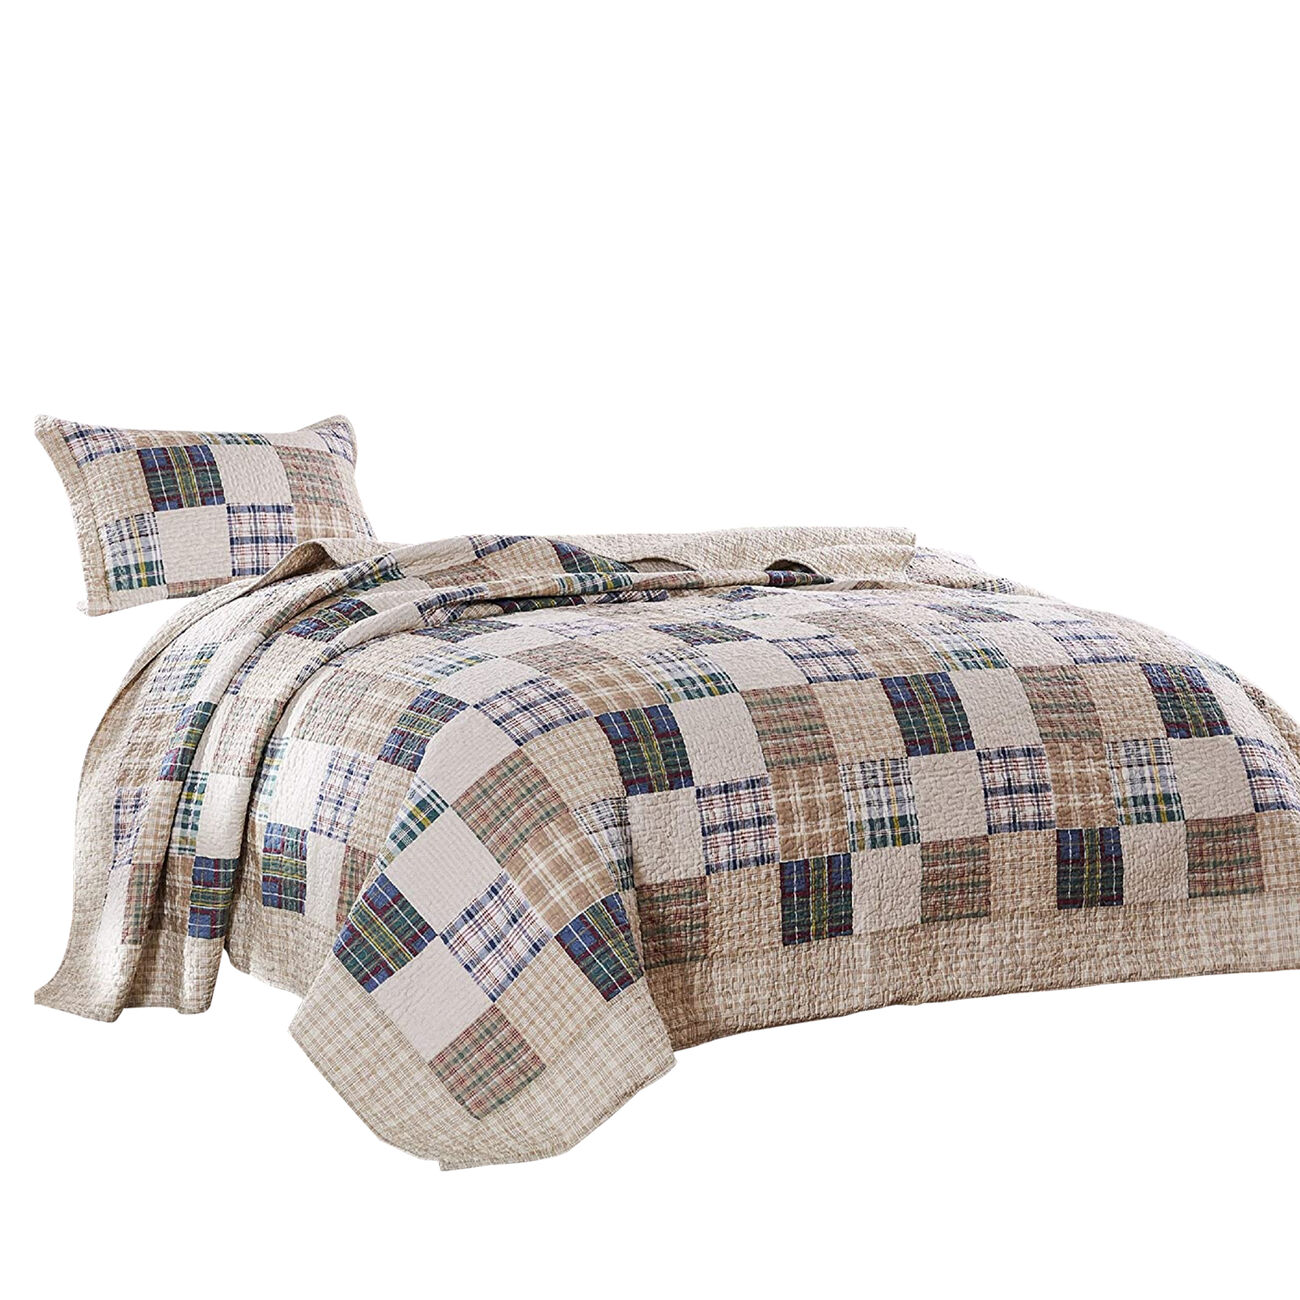 Ebro 2 Piece Twin Size Quilt Set with Plaids Square and Stripes Pattern, Cream